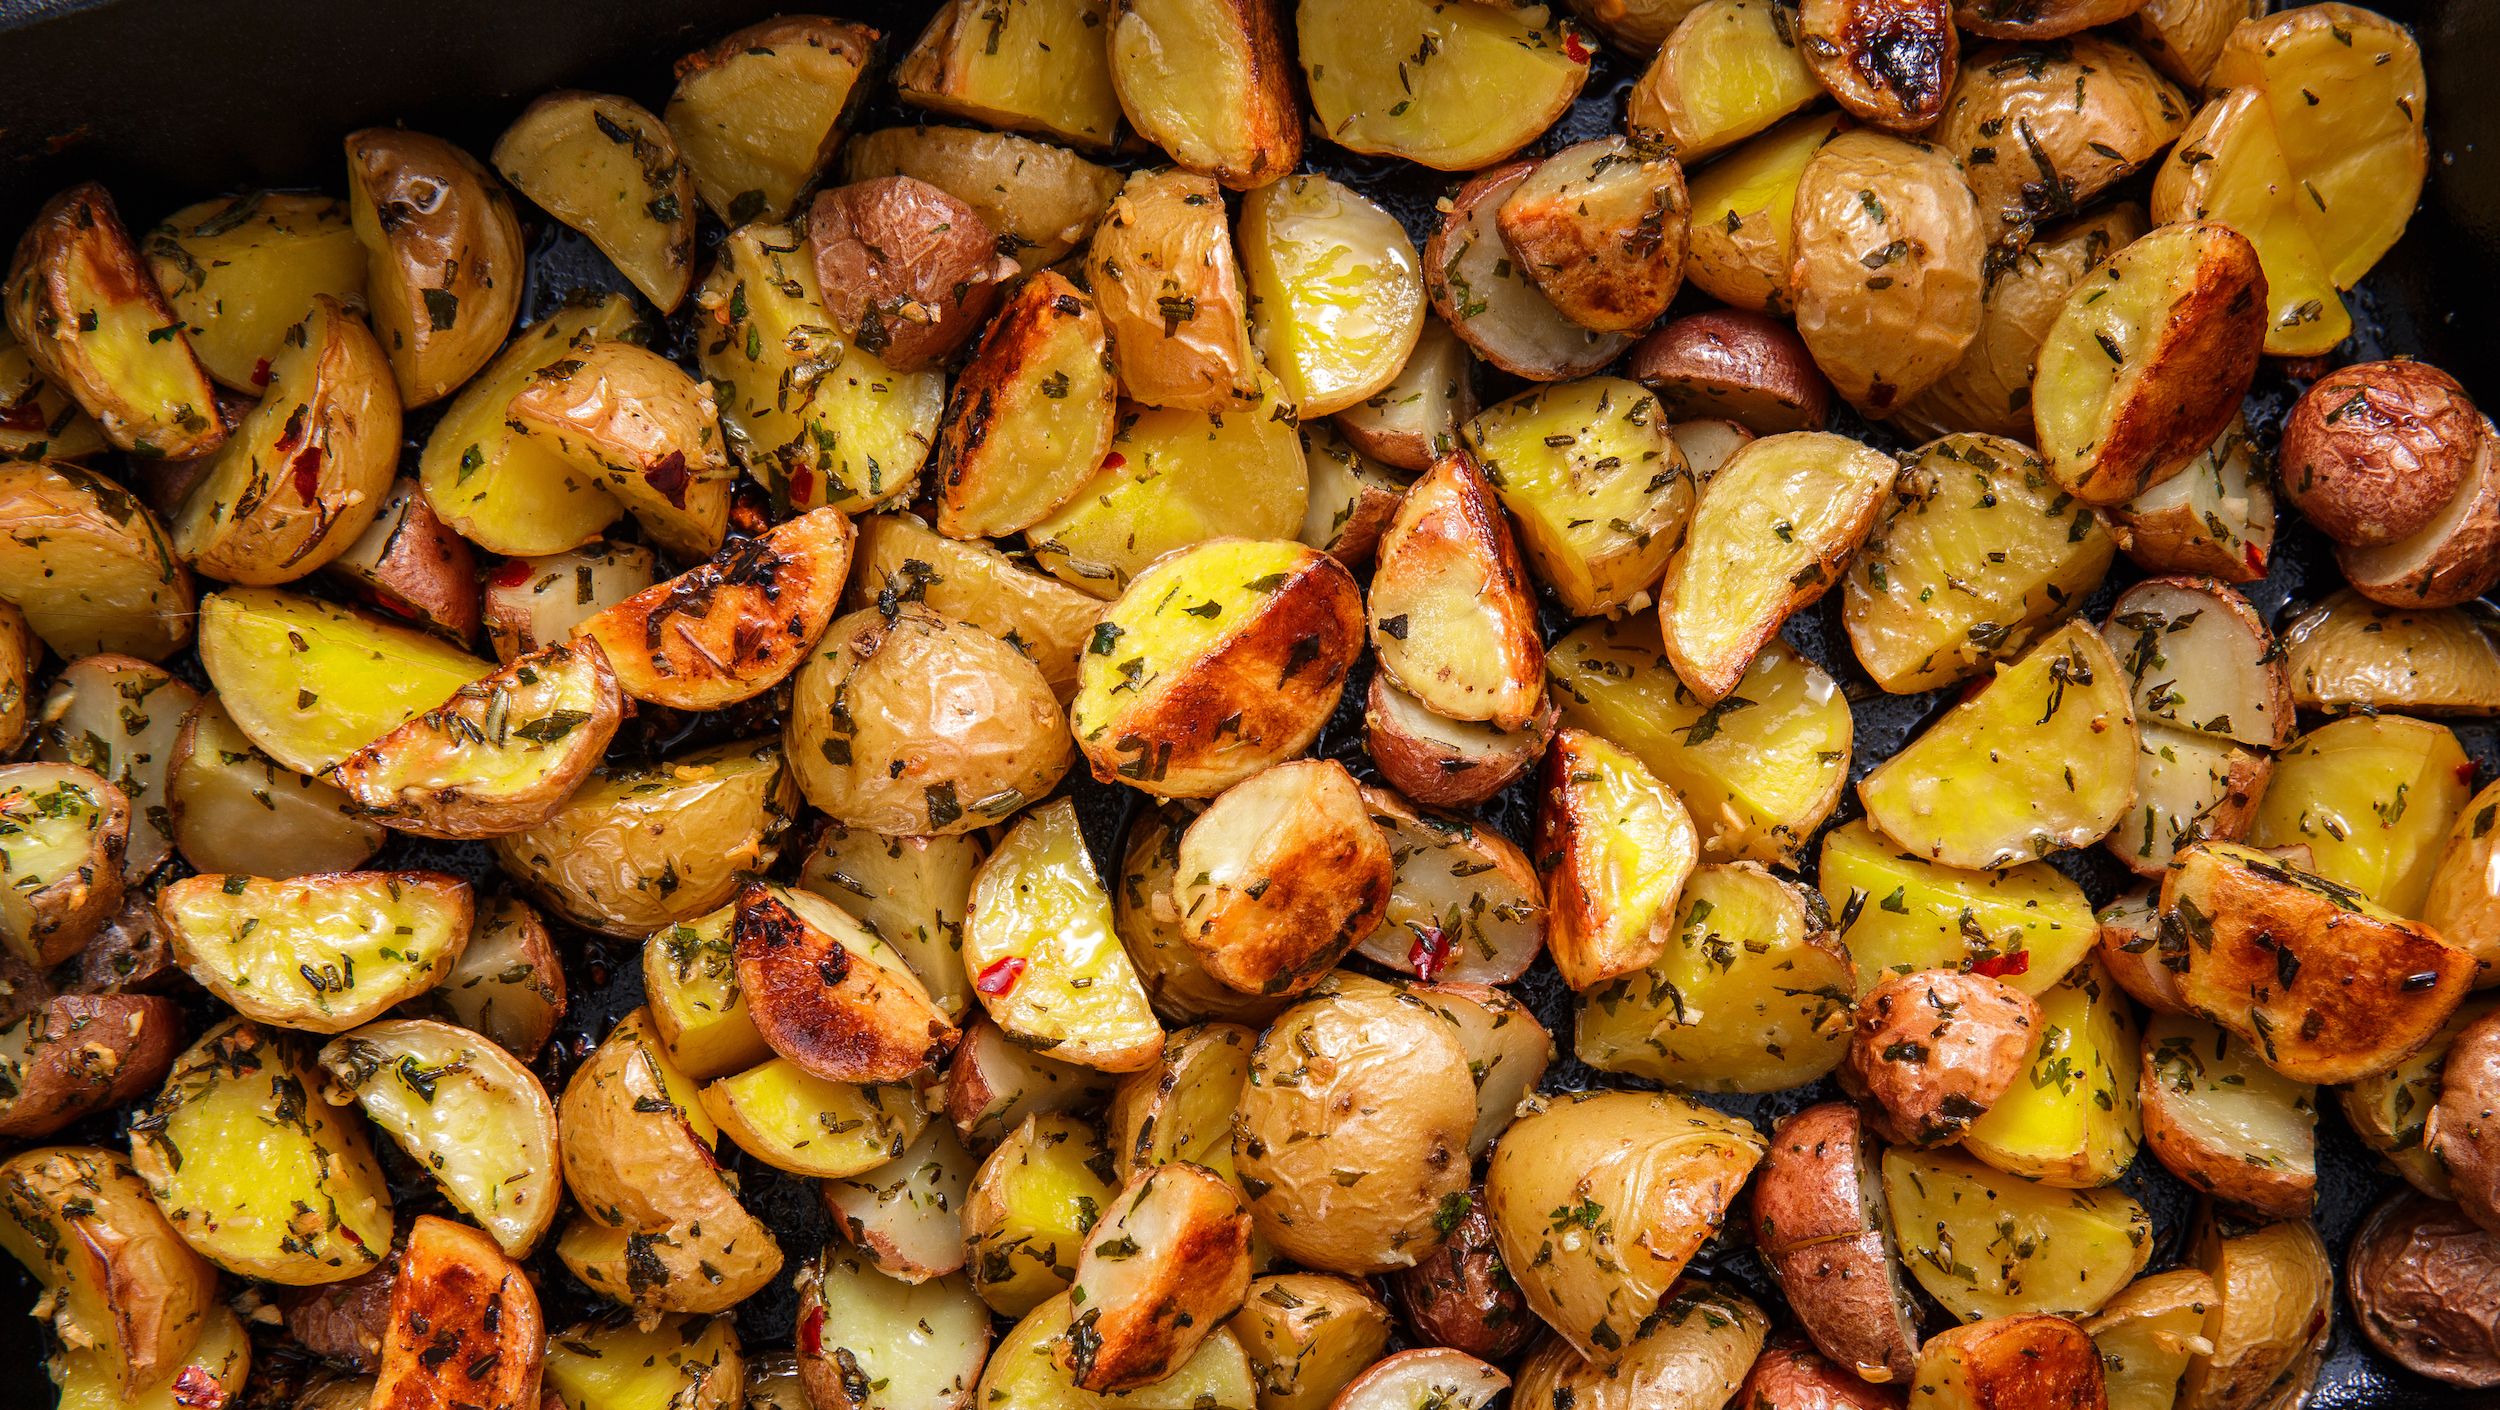 https://hips.hearstapps.com/hmg-prod/images/delish-roasted-potatoes-vertical-1-1540492242.jpg?crop=1.00xw:0.846xh;0,0.0673xh